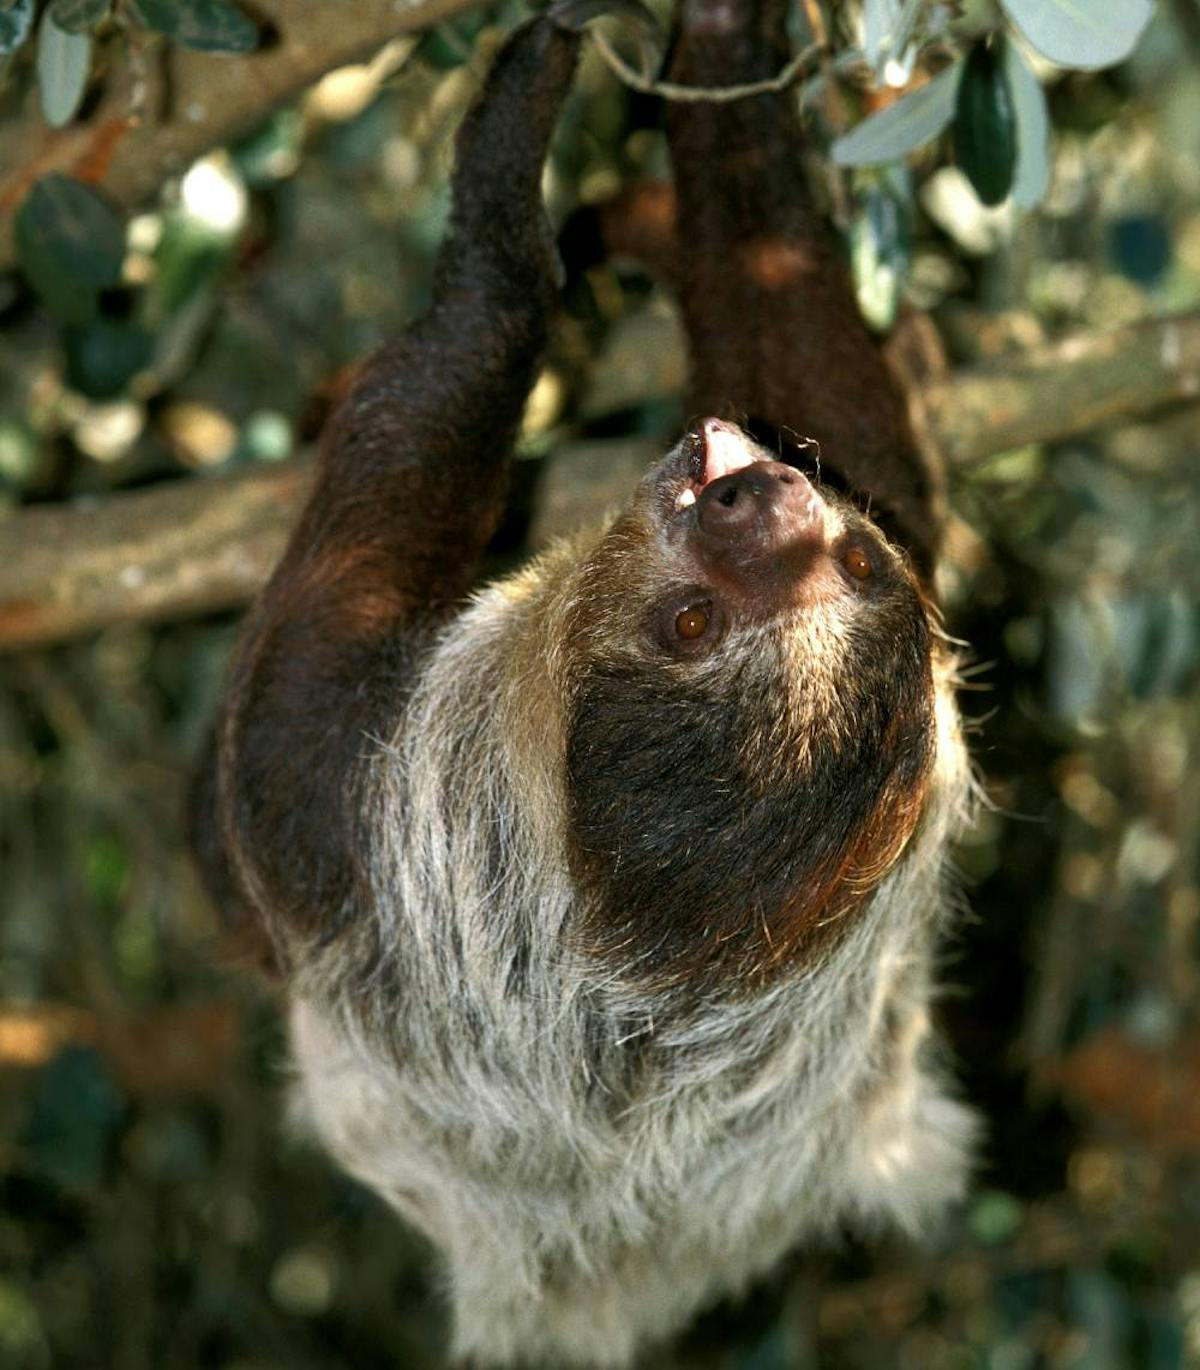 Maned three-toed sloth: a charming species that aids growing trees